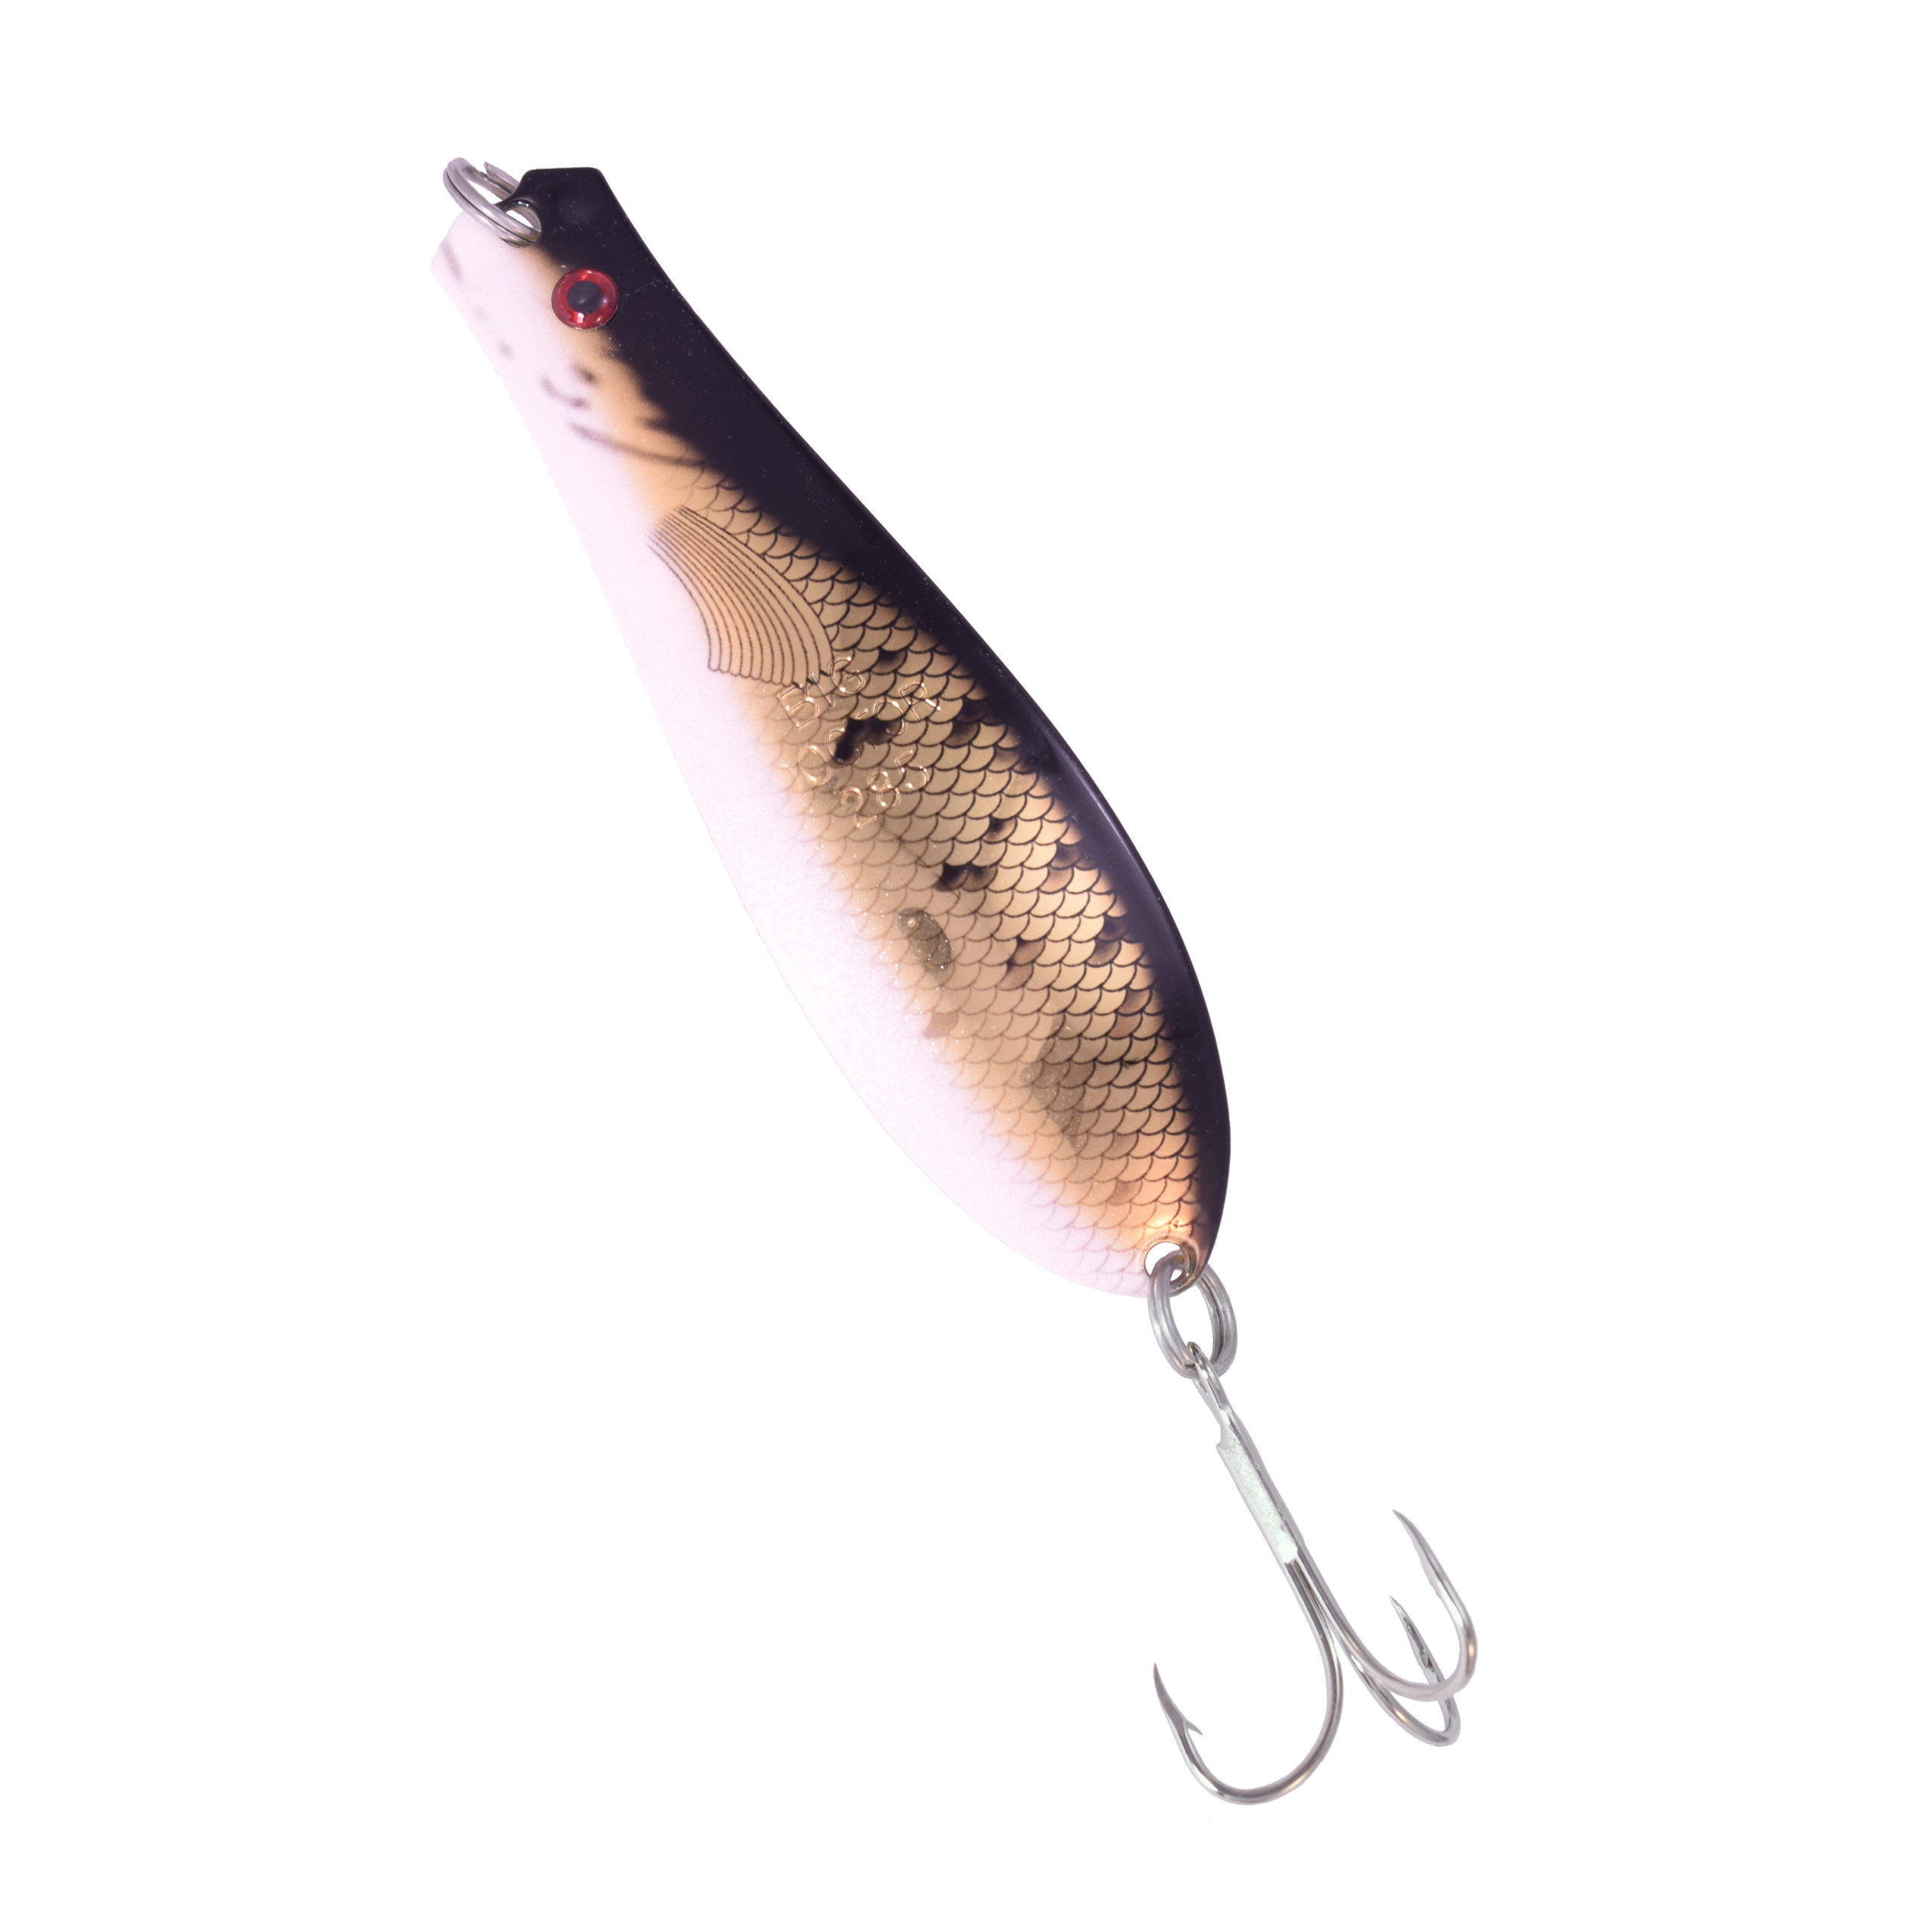 https://www.yellowbirdproducts.com/wp-content/uploads/2021/10/44-Walleye-scaled.jpg